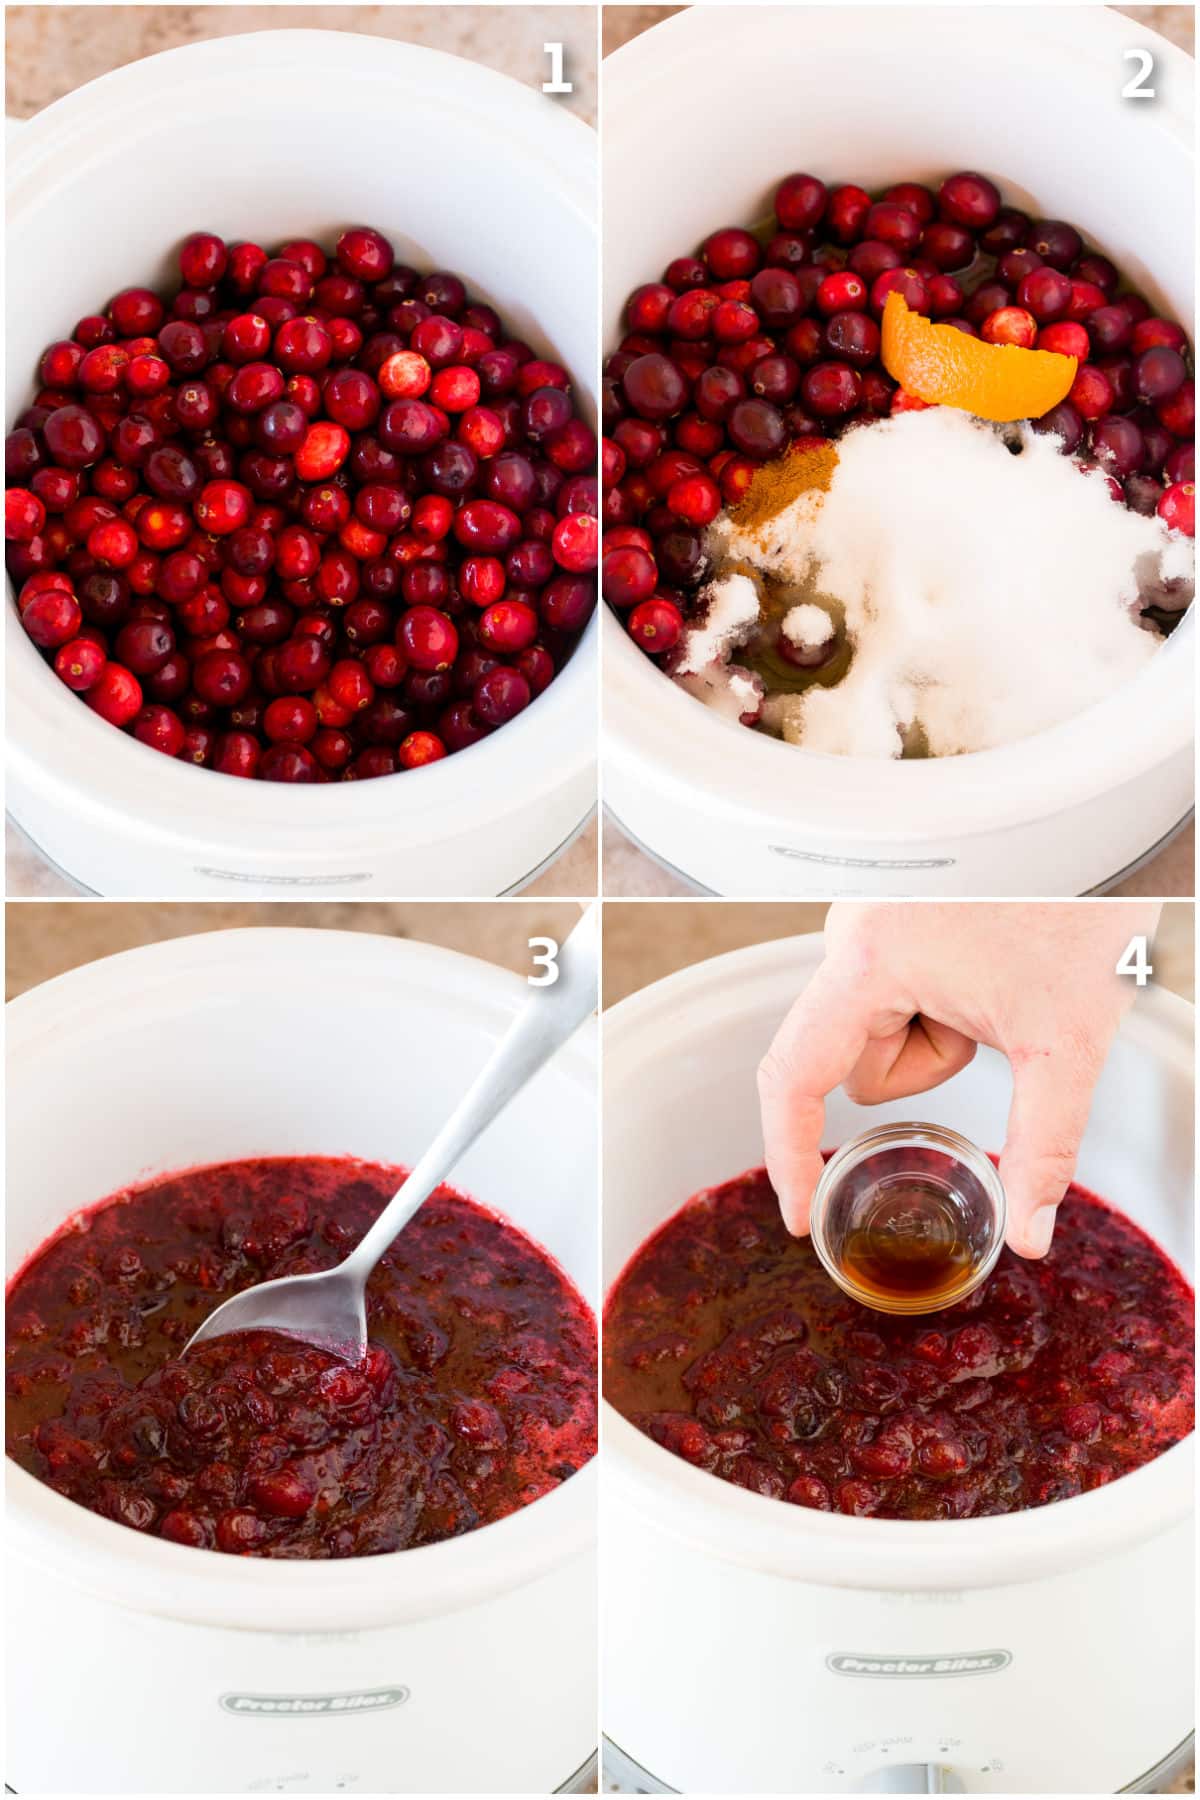 Process shots showing how to make slow cooker cranberry sauce.